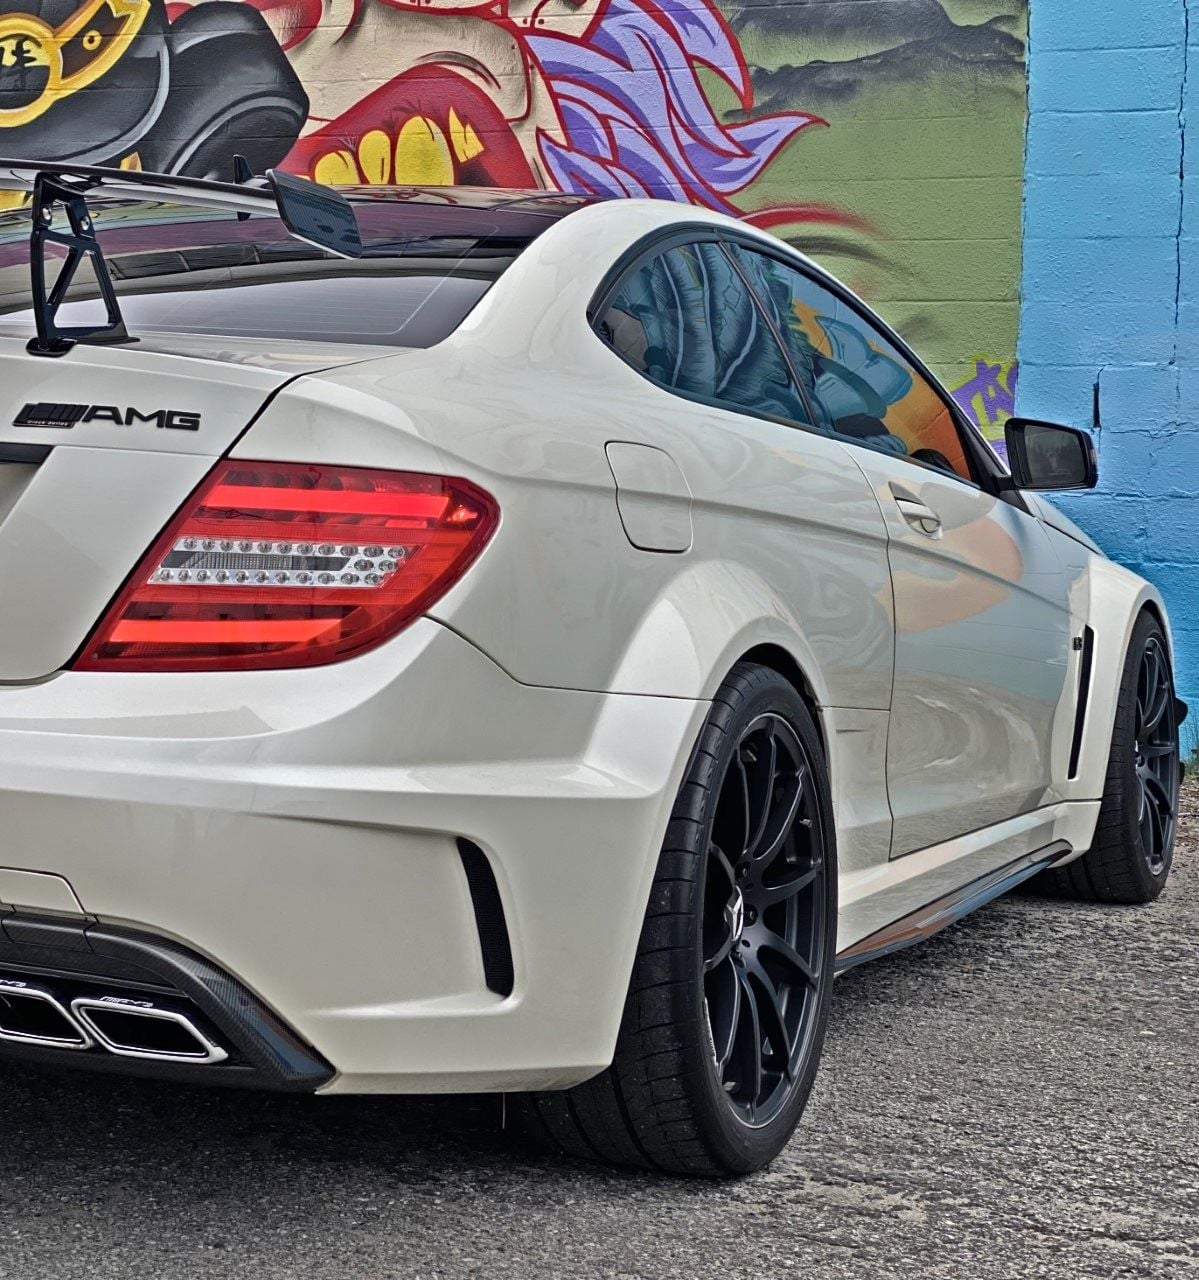 2012 Mercedes-Benz C63 AMG - 2012 C63 AMG Black Series - Used - VIN WDDGJ7HB8CF872928 - 21,500 Miles - 8 cyl - 2WD - Automatic - Coupe - White - Wilmington, NC 28403, United States